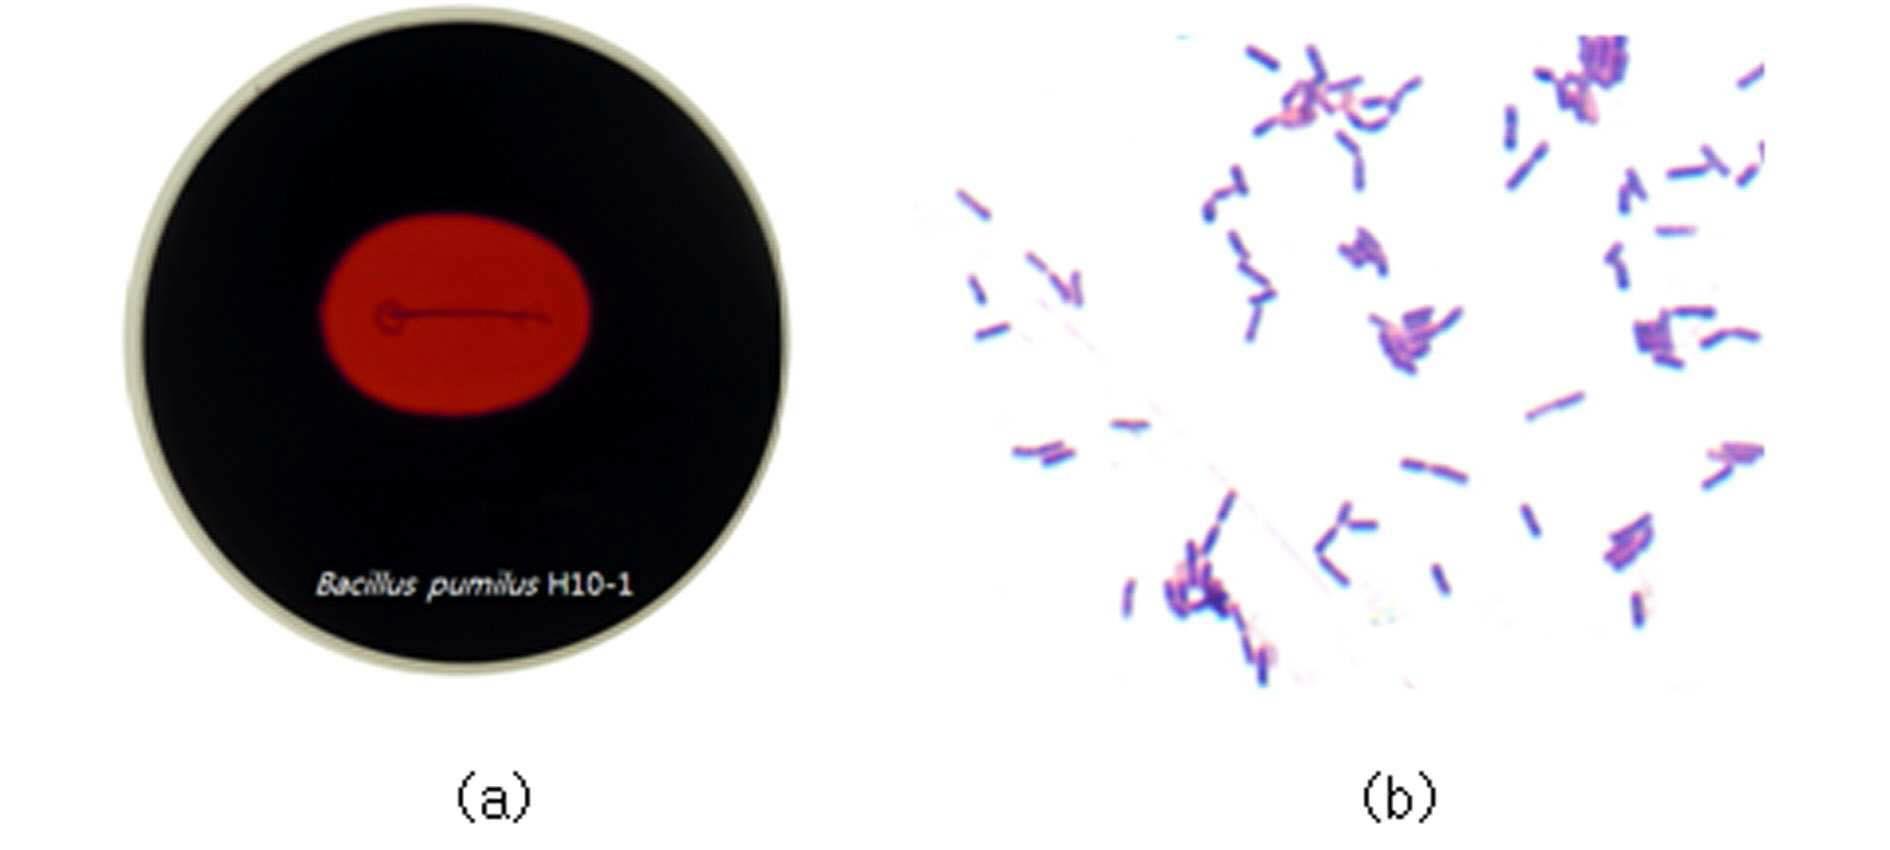 Congo red (a) and Gram staining (b) of Bacillus pumilus H10-1.